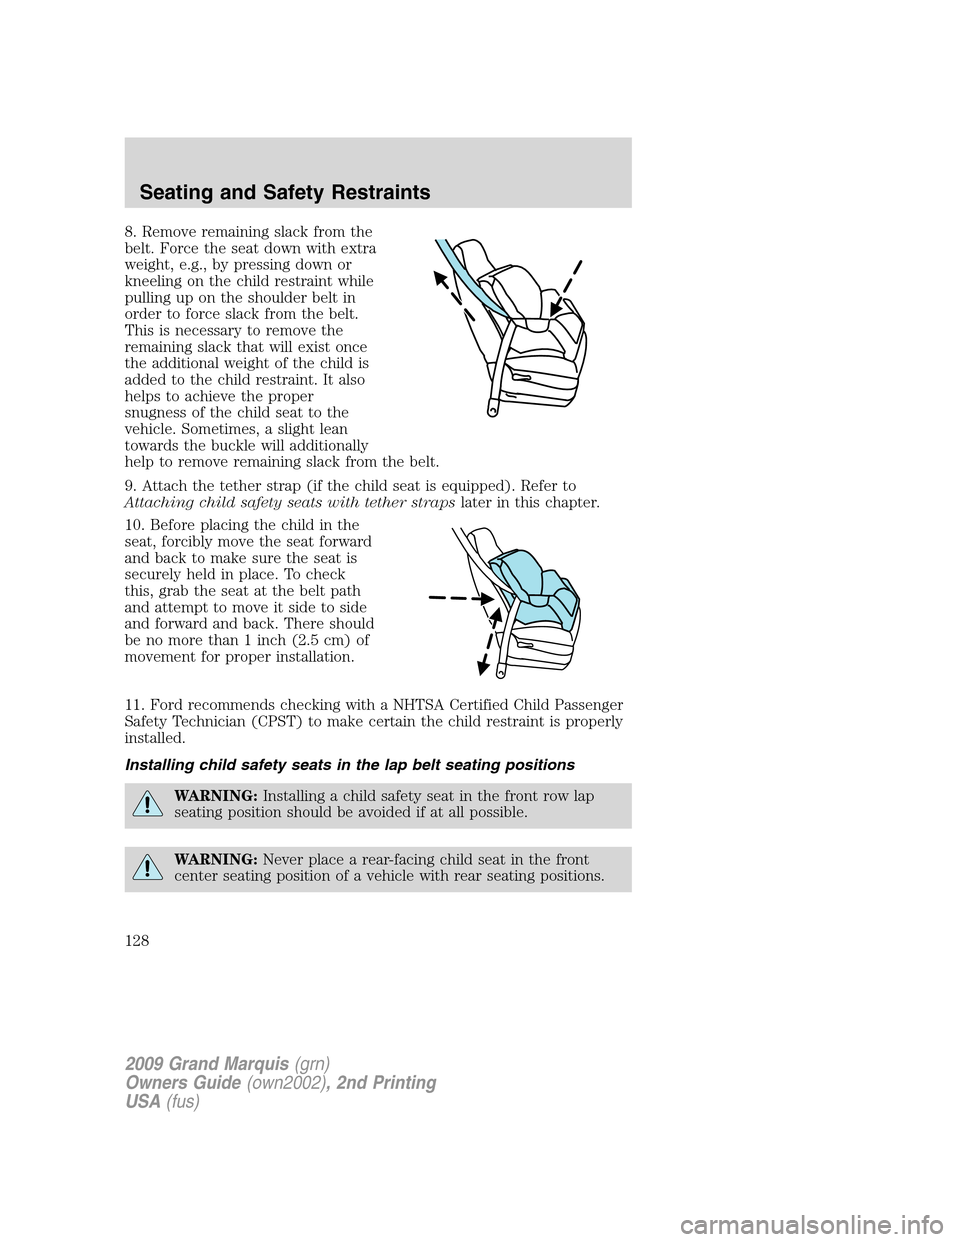 Mercury Grand Marquis 2009  Owners Manuals 8. Remove remaining slack from the
belt. Force the seat down with extra
weight, e.g., by pressing down or
kneeling on the child restraint while
pulling up on the shoulder belt in
order to force slack 